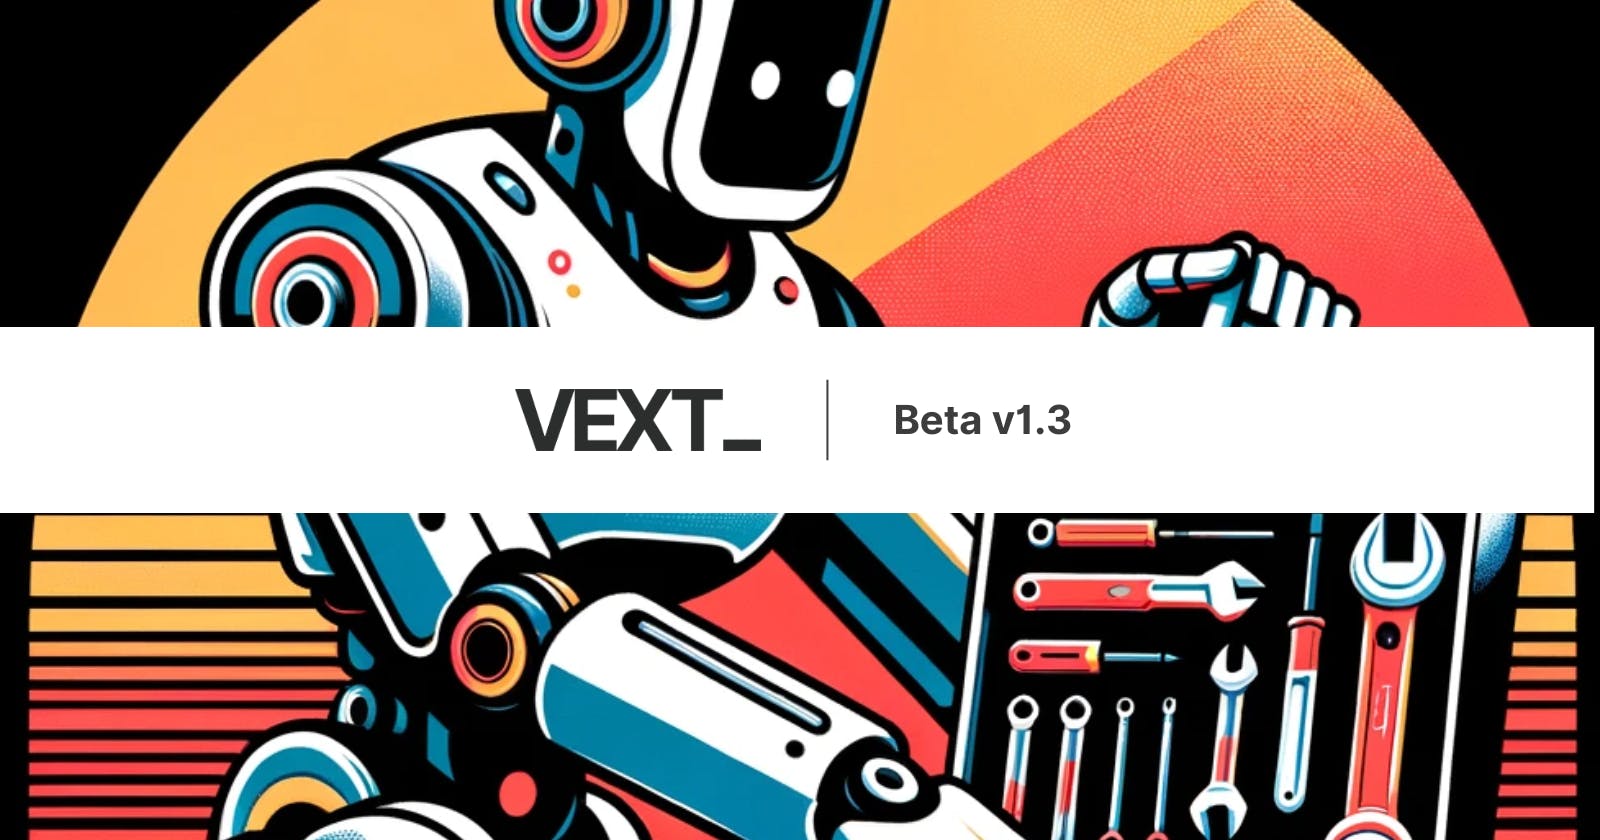 Vext Beta v1.3: What's New